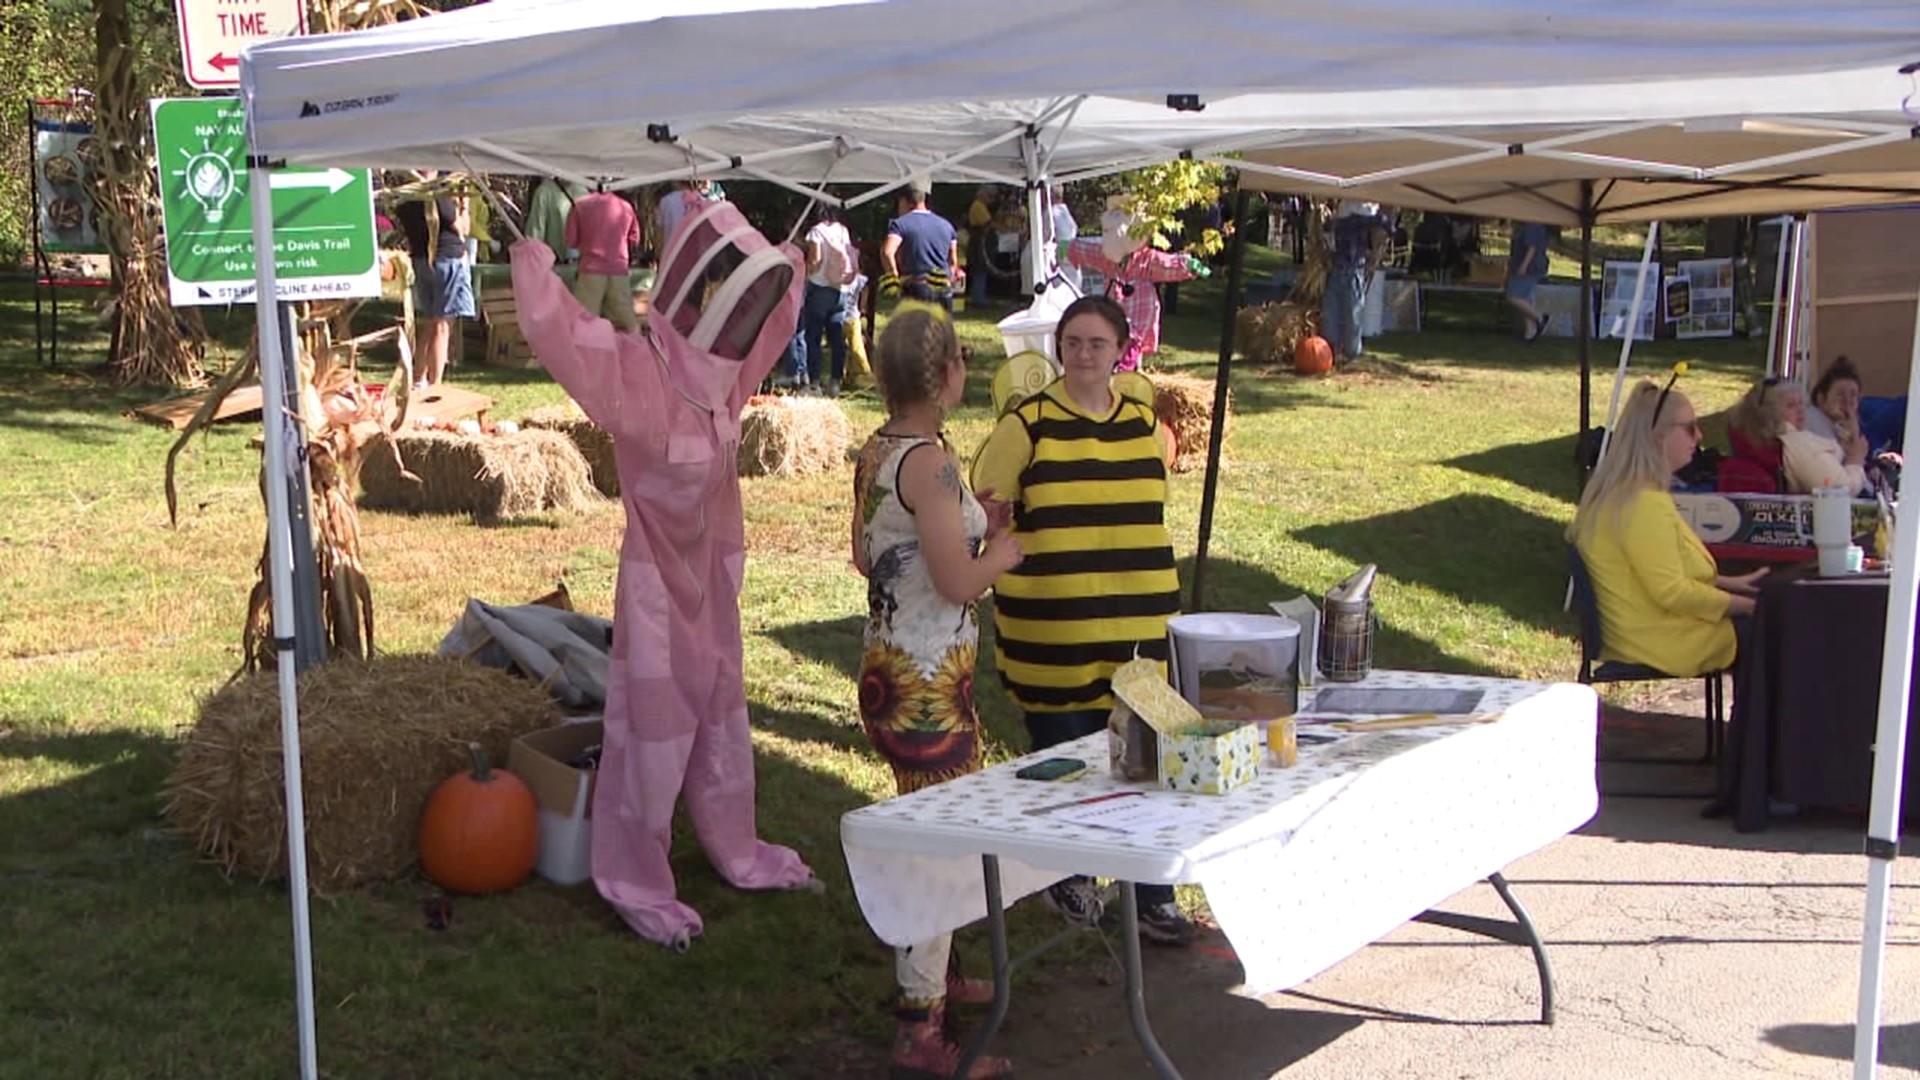 Celebrating honeybees and the role they play in agriculture was the goal of an event at Nay Aug Park in Scranton on Sunday.